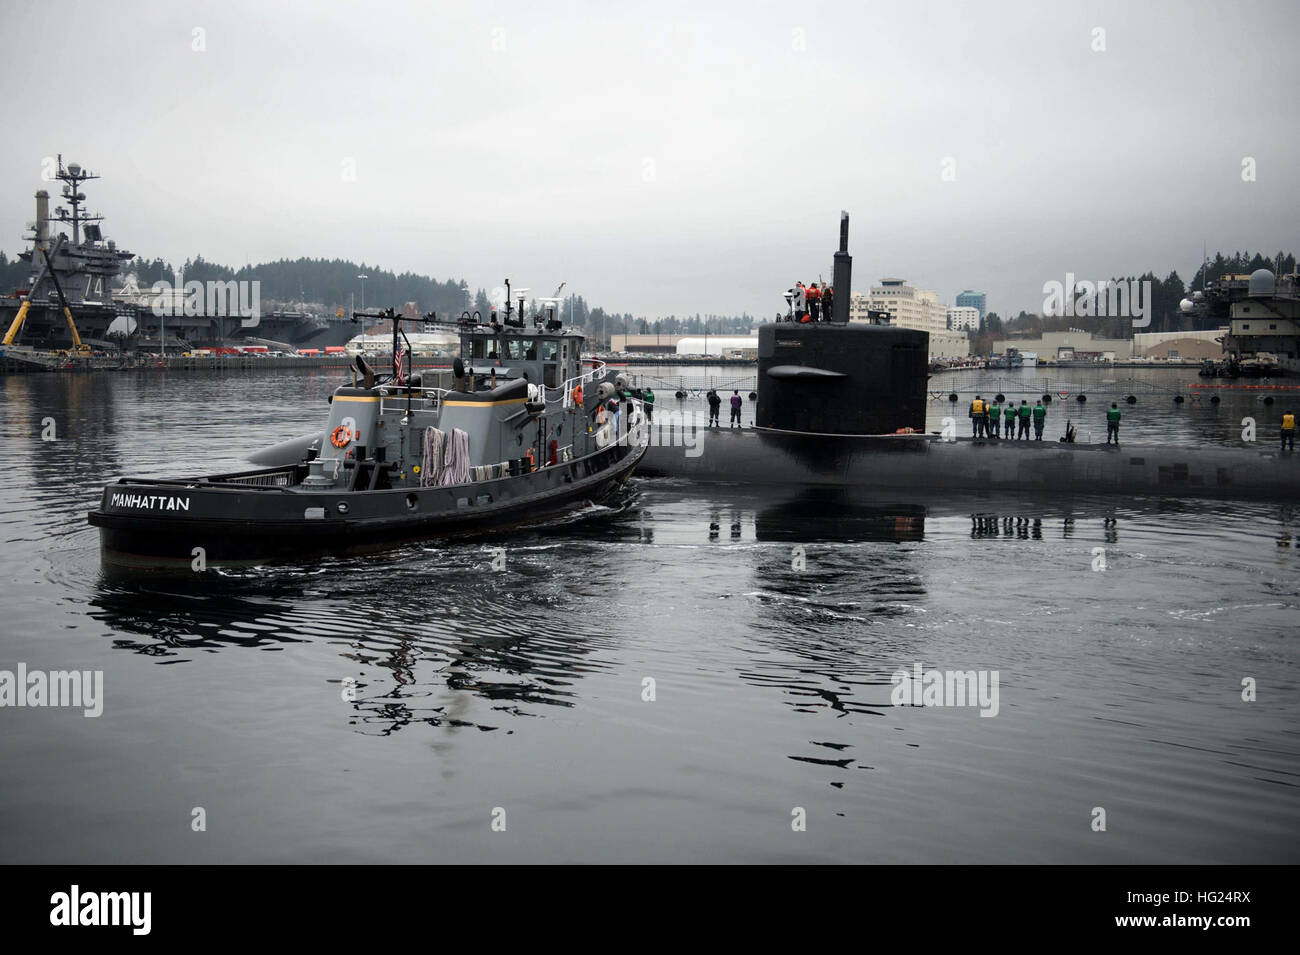 150225-N-JY507-049 BREMERTON, Wash. (Feb. 25, 2015) – The Los Angeles-class fast-attack submarine USS Bremerton (SSN 698) is escorted by the YTZ-779 Manhattan to Pier Delta at Naval Base Kitsap-Bremerton prior to mooring. USS Bremerton is making a namesake visit to Bremerton, Wash., for the first time since 2012. (U.S. Navy photo by Mass Communication Specialist 3rd Class Seth Coulter/Released) USS Bremerton returns for namesake visit 150225-N-JY507-049 Stock Photo